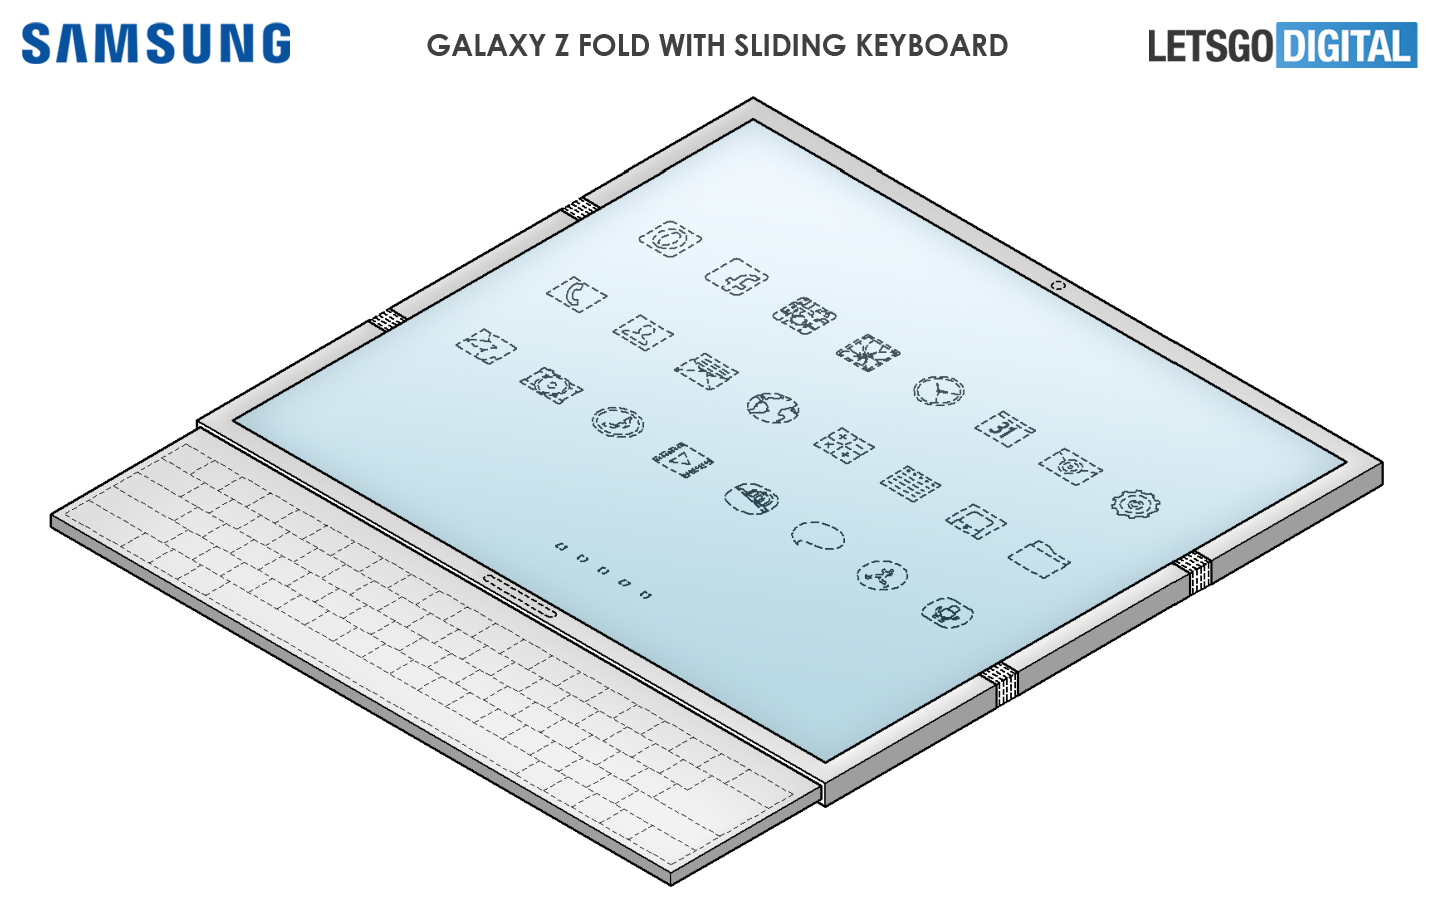 High-quality images of the possible Galaxy Z Fold 3 with sliding keyboard